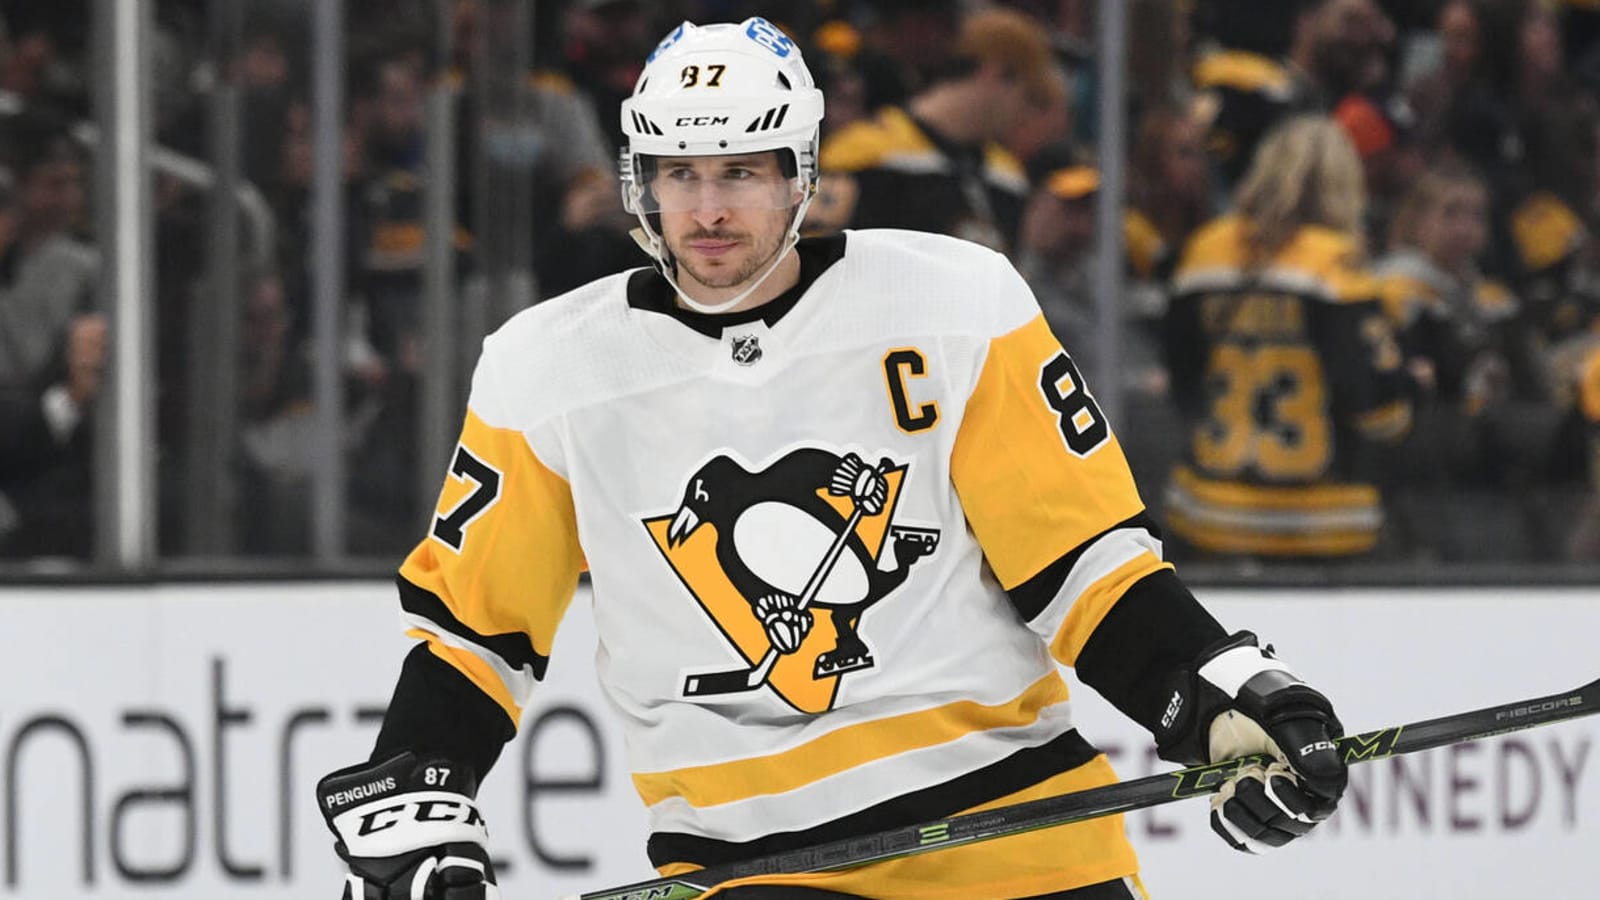 Sidney Crosby out for at least Game 6 vs. Rangers